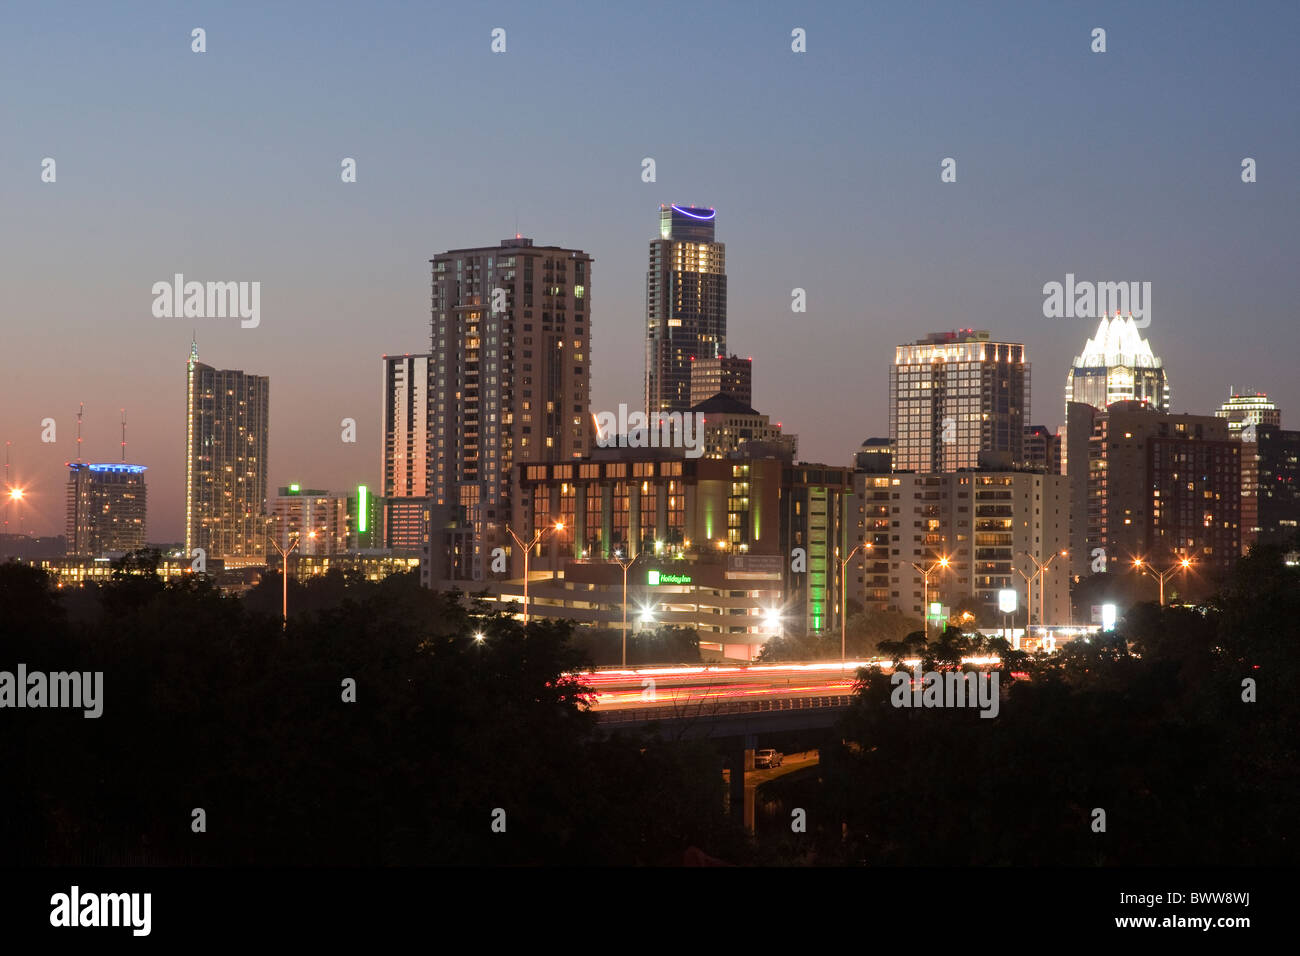 Skyline of downtown Austin, Texas, with new skyscrapers shows growth of city during economic downturn in other parts of the USA Stock Photo